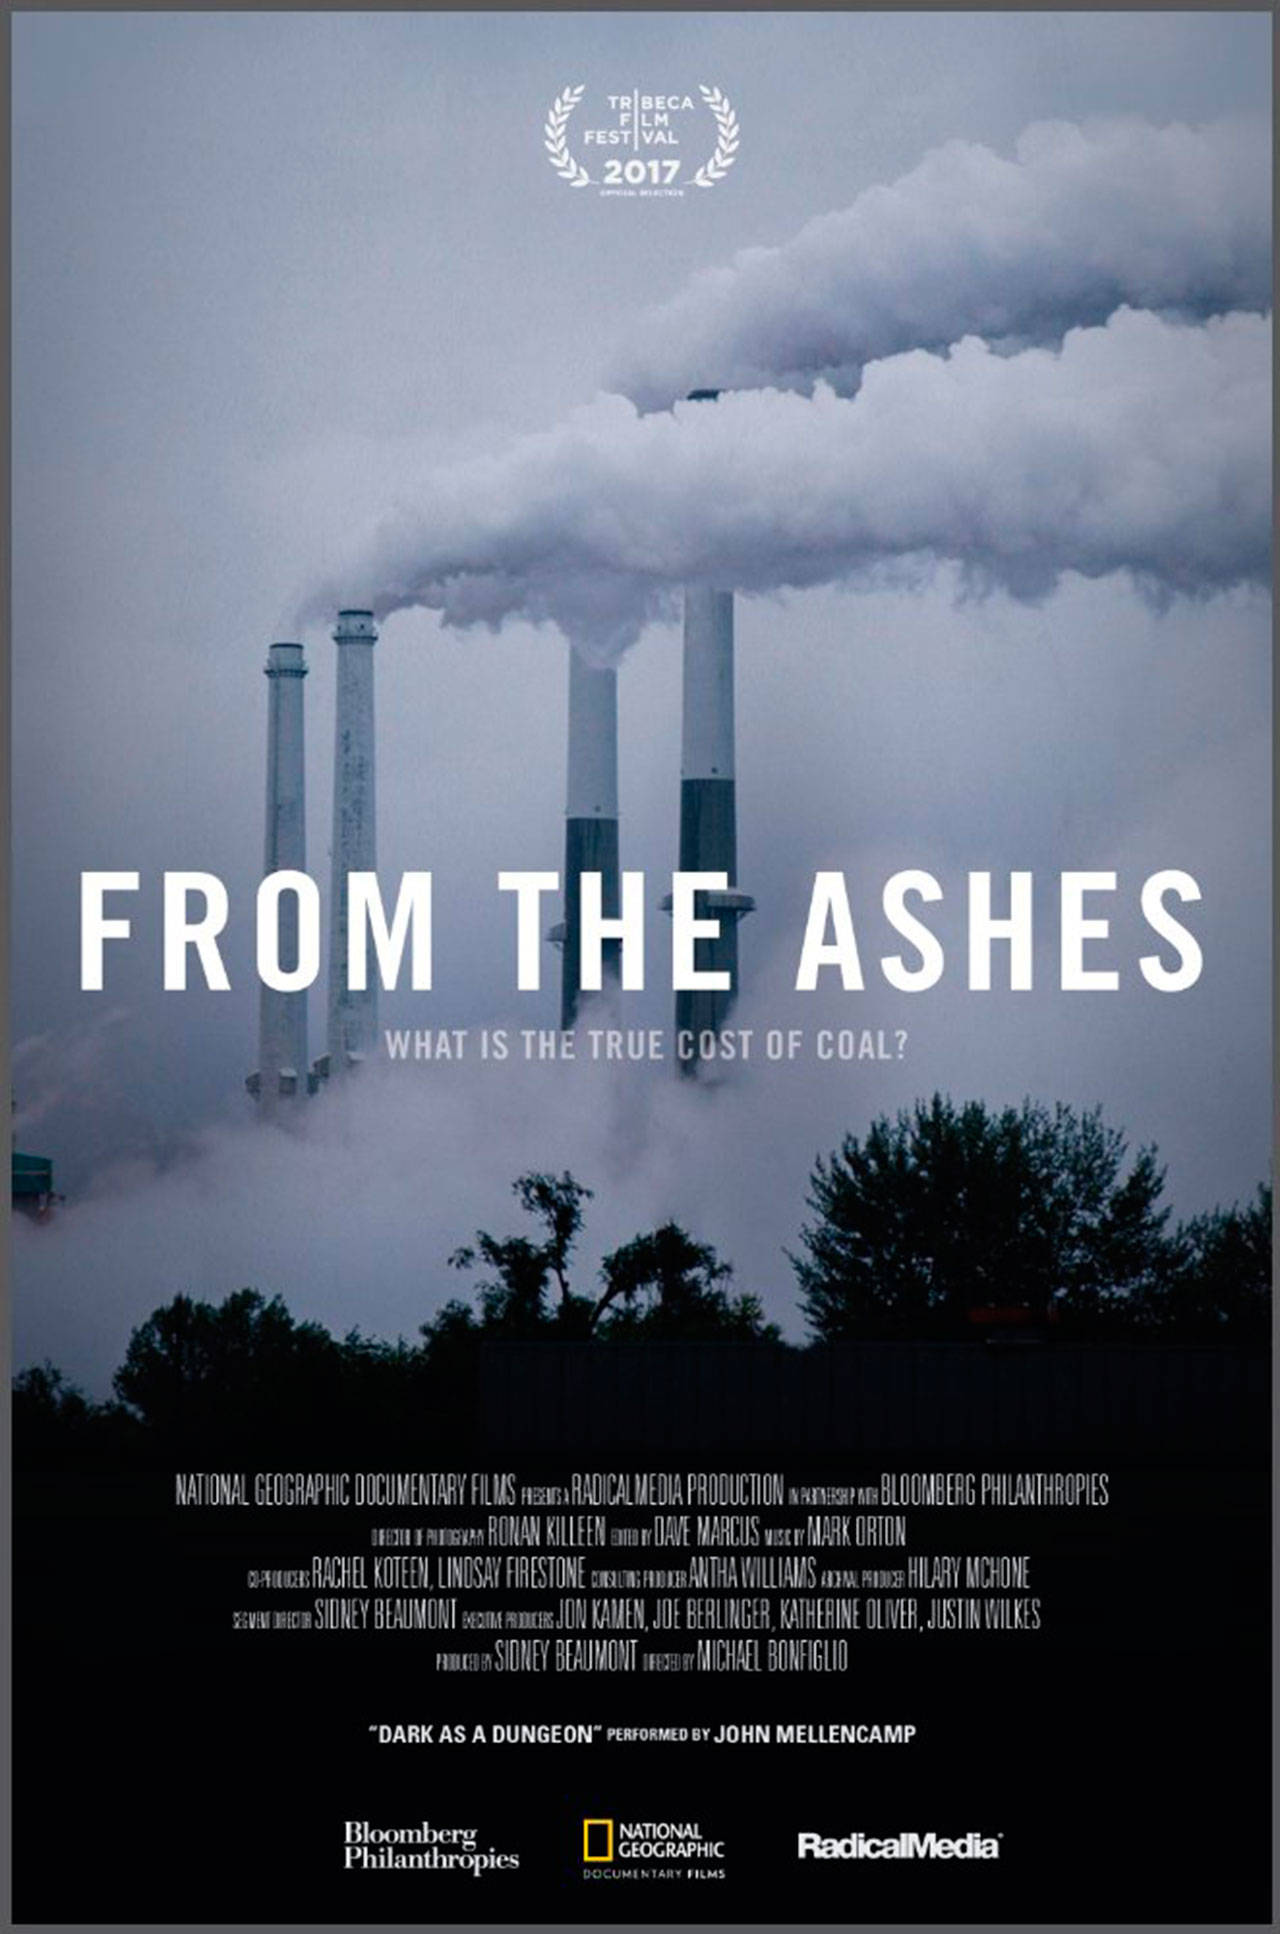 Image courtesy of RadicalMedia | Movies That Matter will screen the 2017 film “From the Ashes” as its next offering in the series.